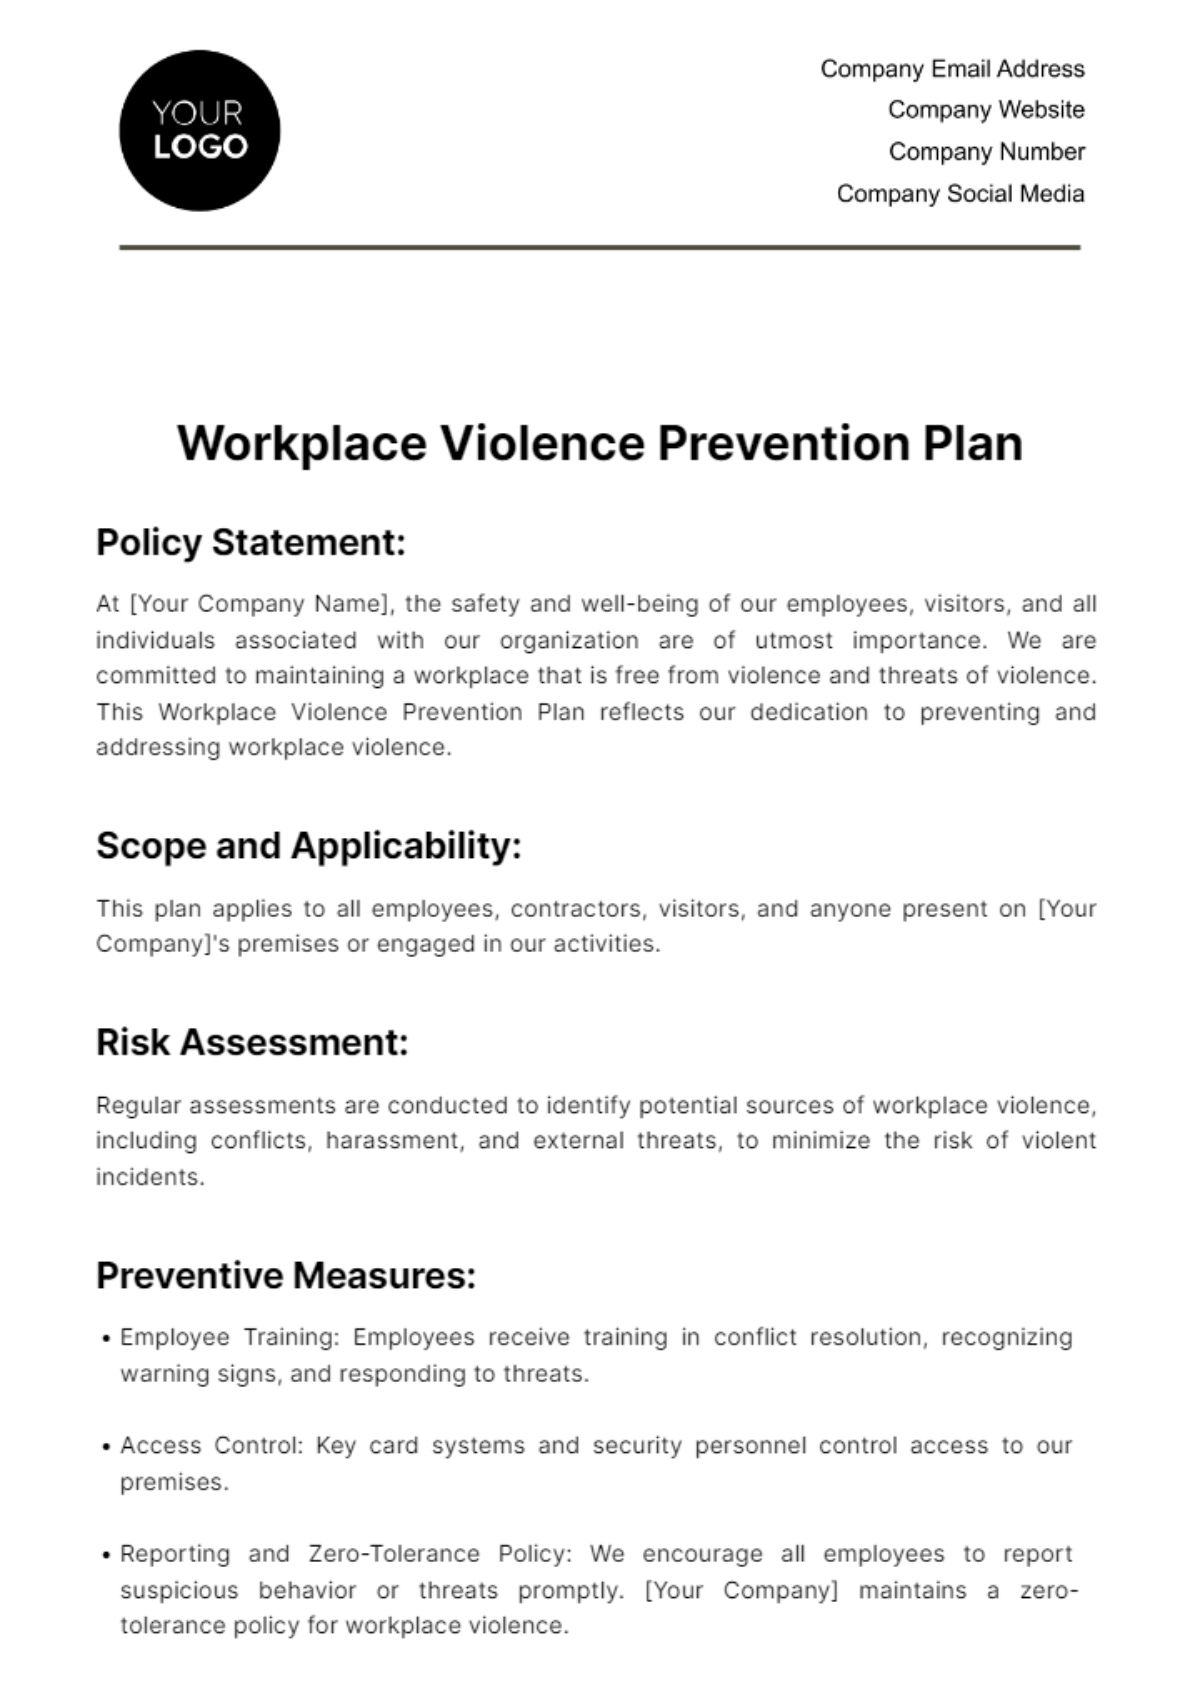 Free Workplace Violence Prevention Plan HR Template